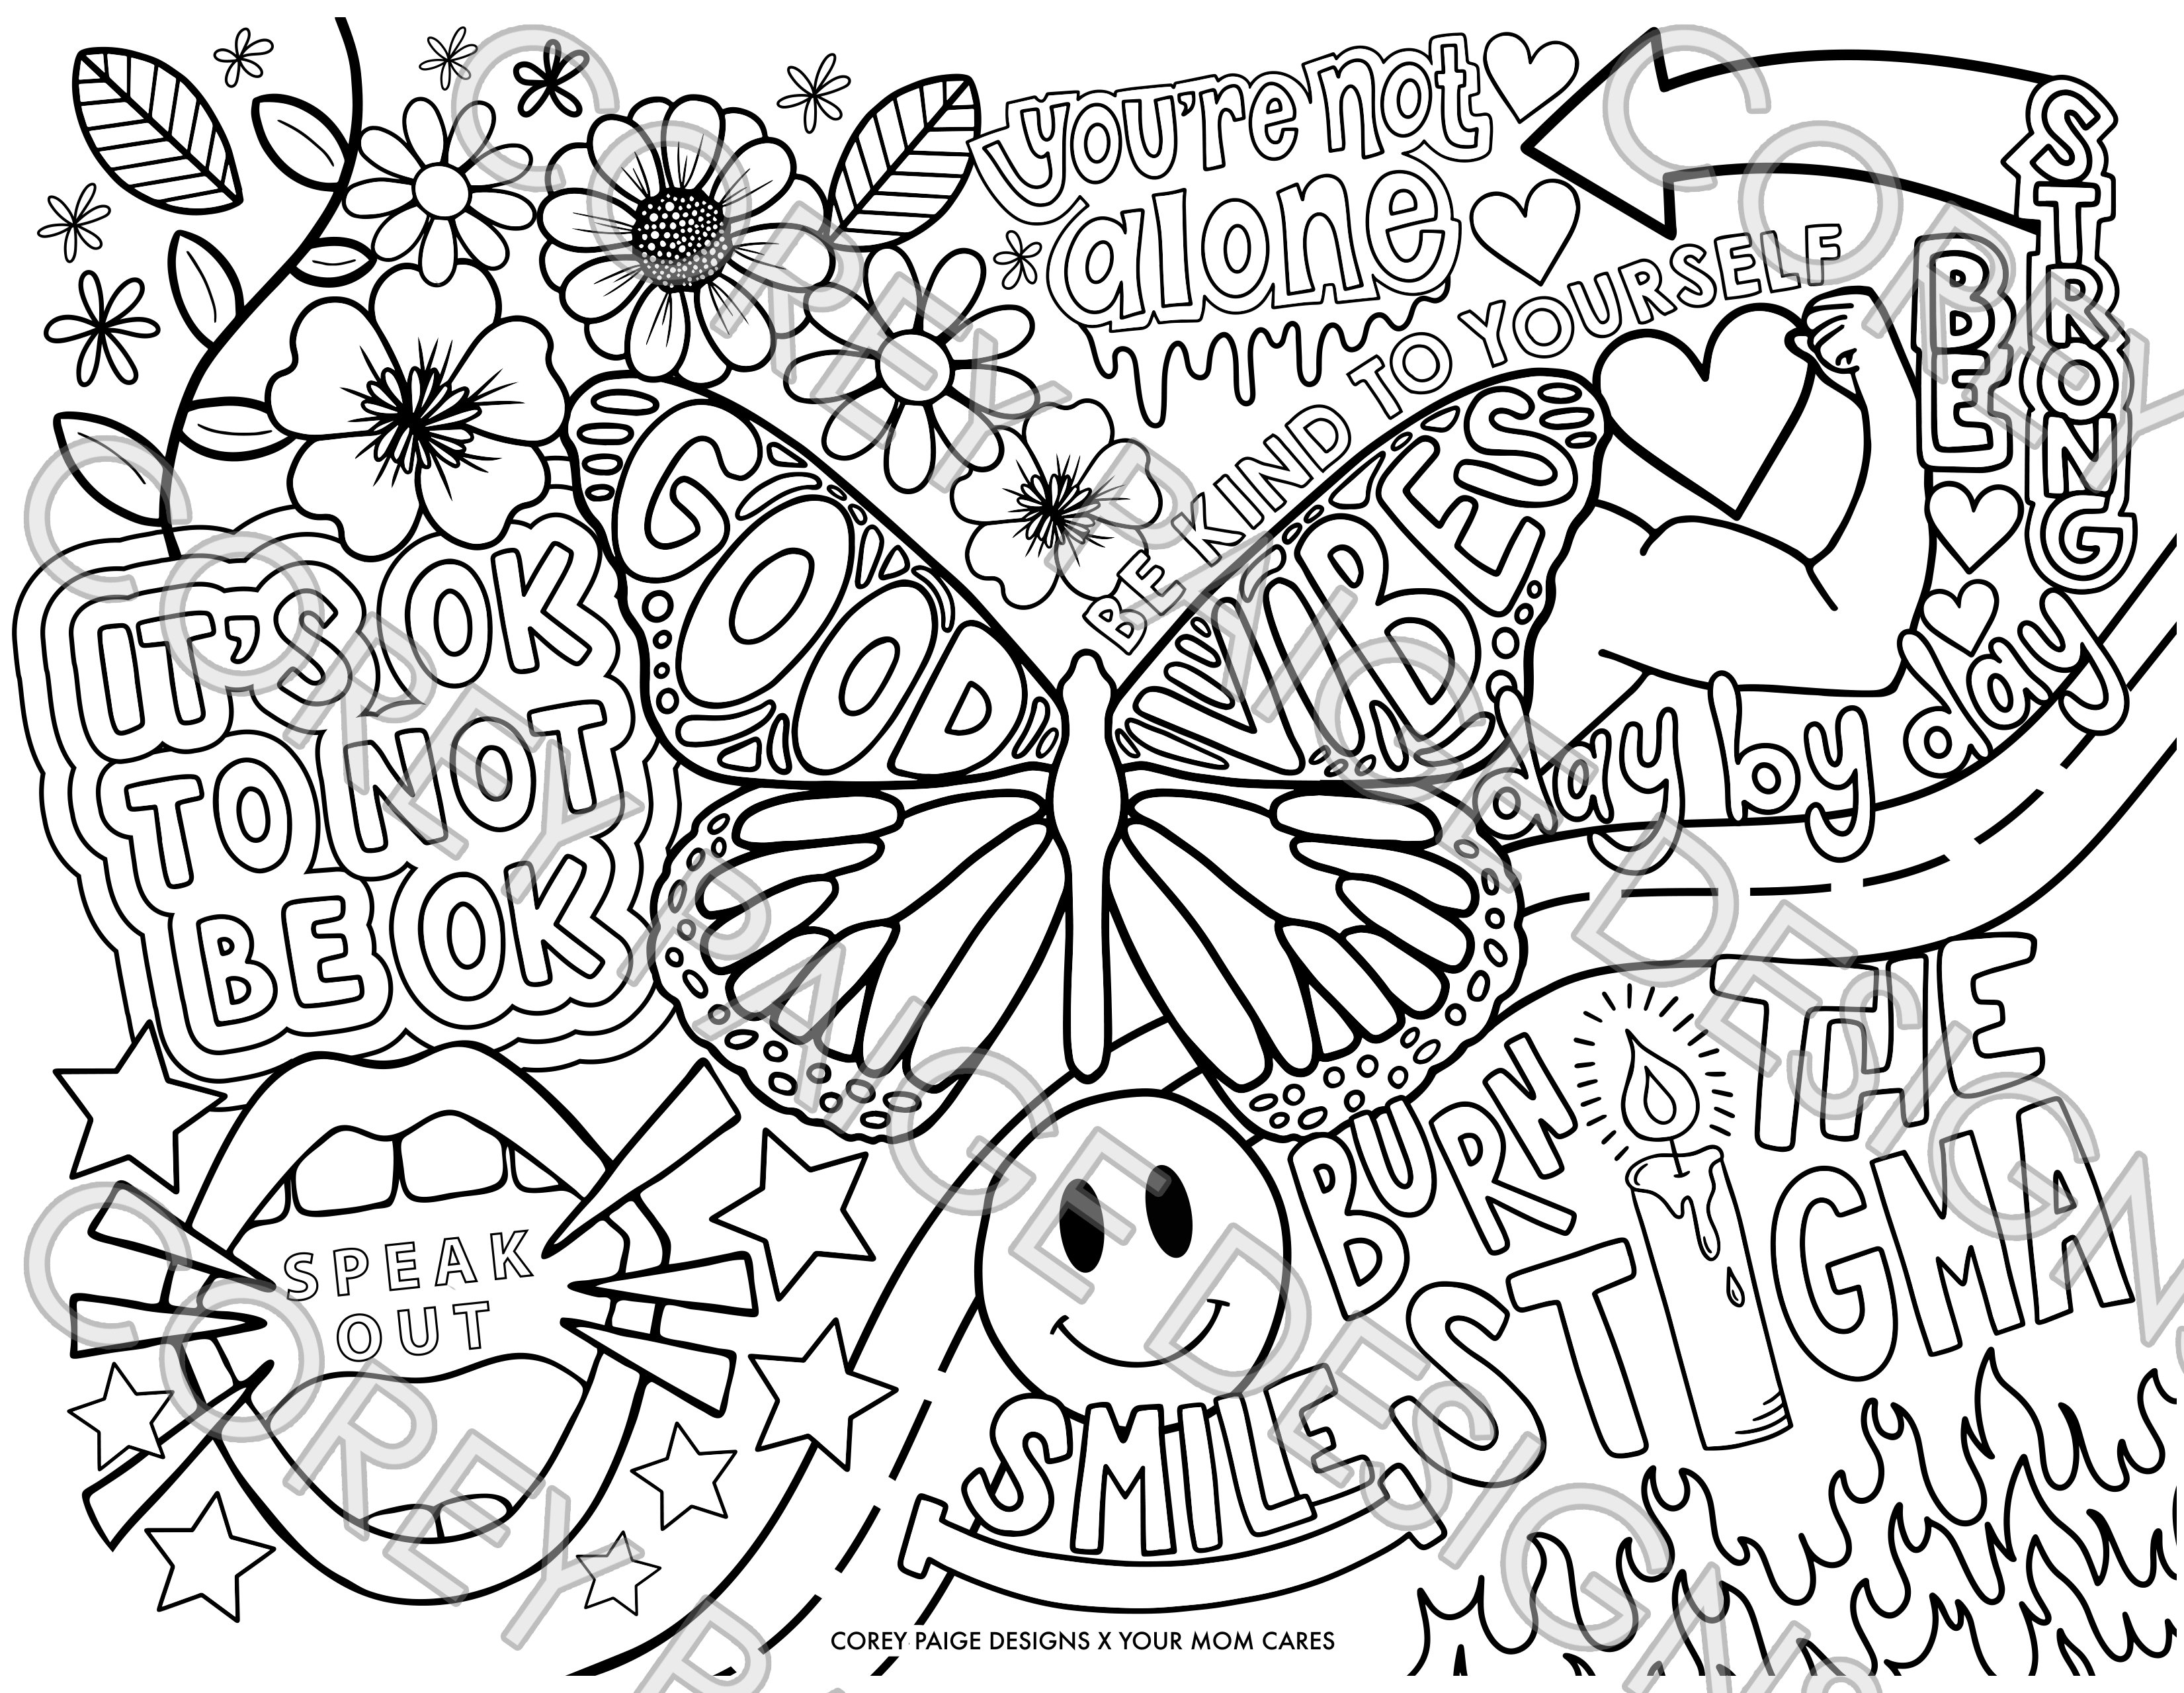 Mental Wellness Collage Coloring Sheet